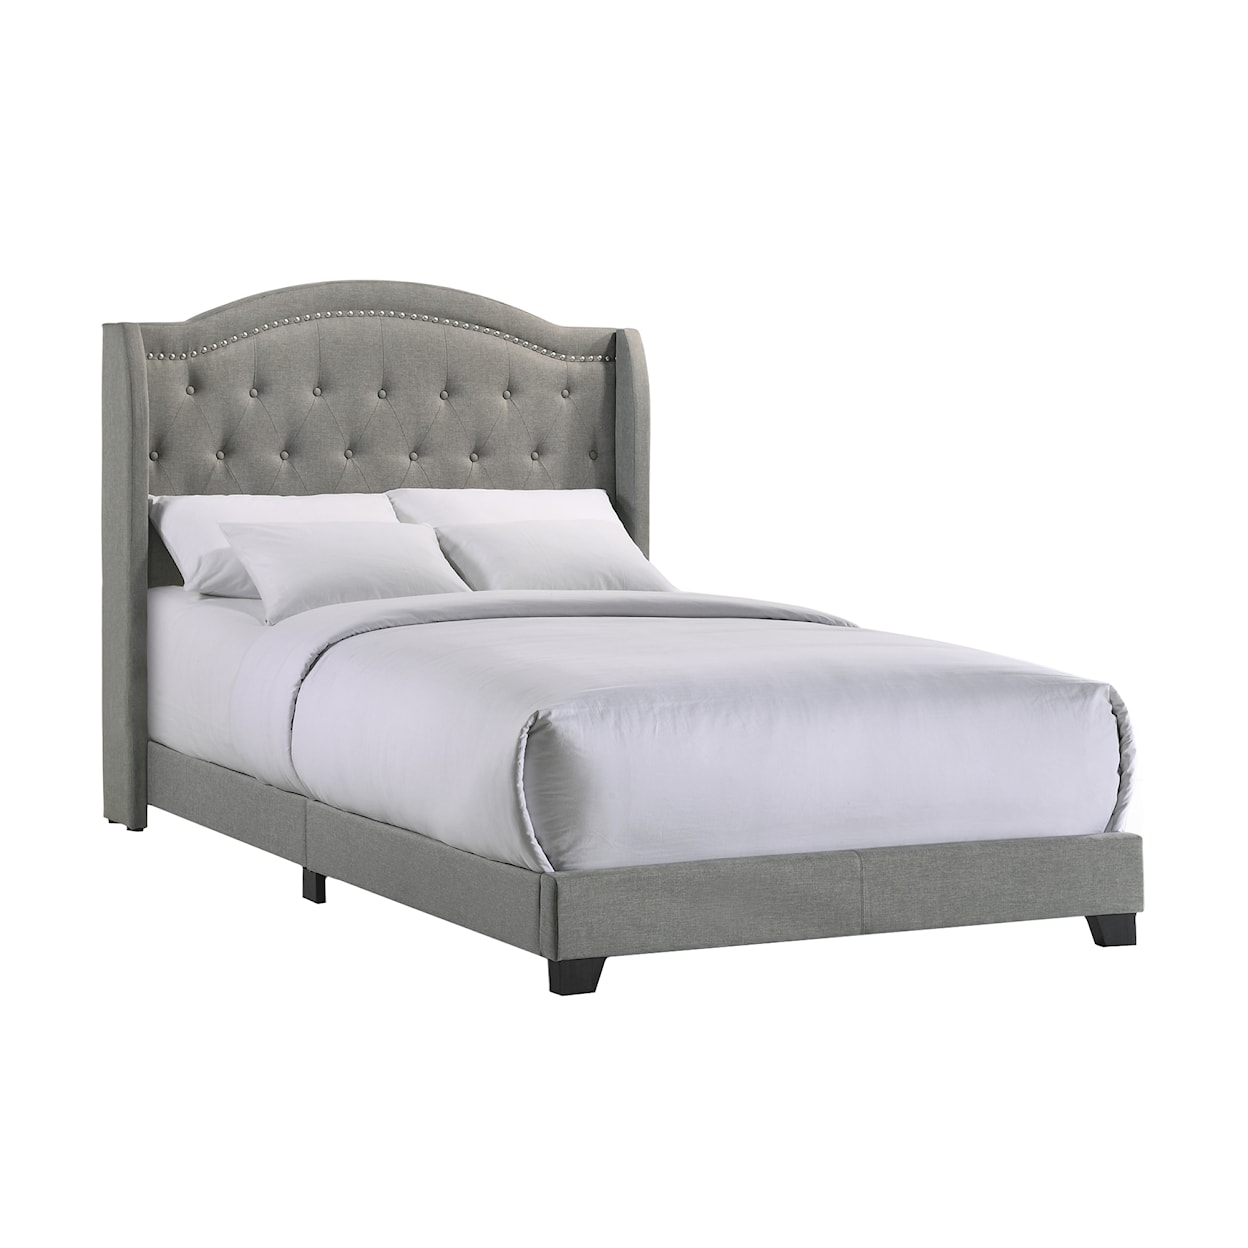 Intercon Upholstered Beds Rhyan Full Upholstered Bed